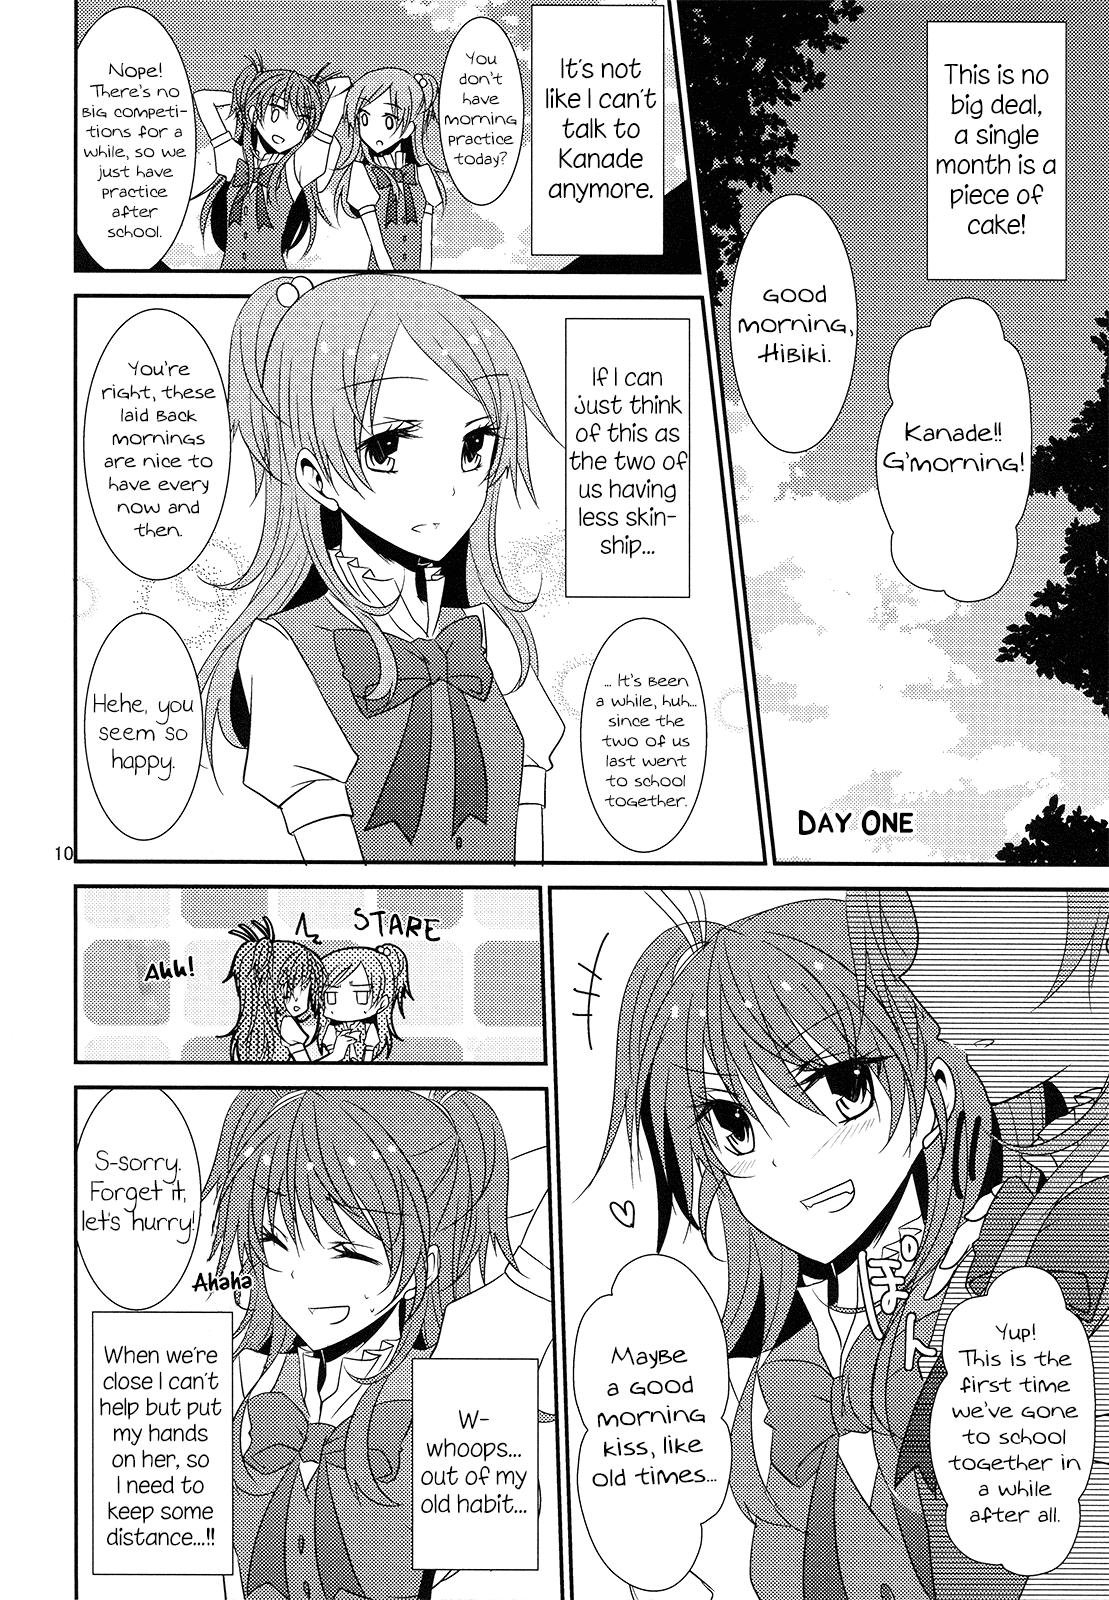 Blacksonboys 2 Become 1 - Suite precure Style - Page 11